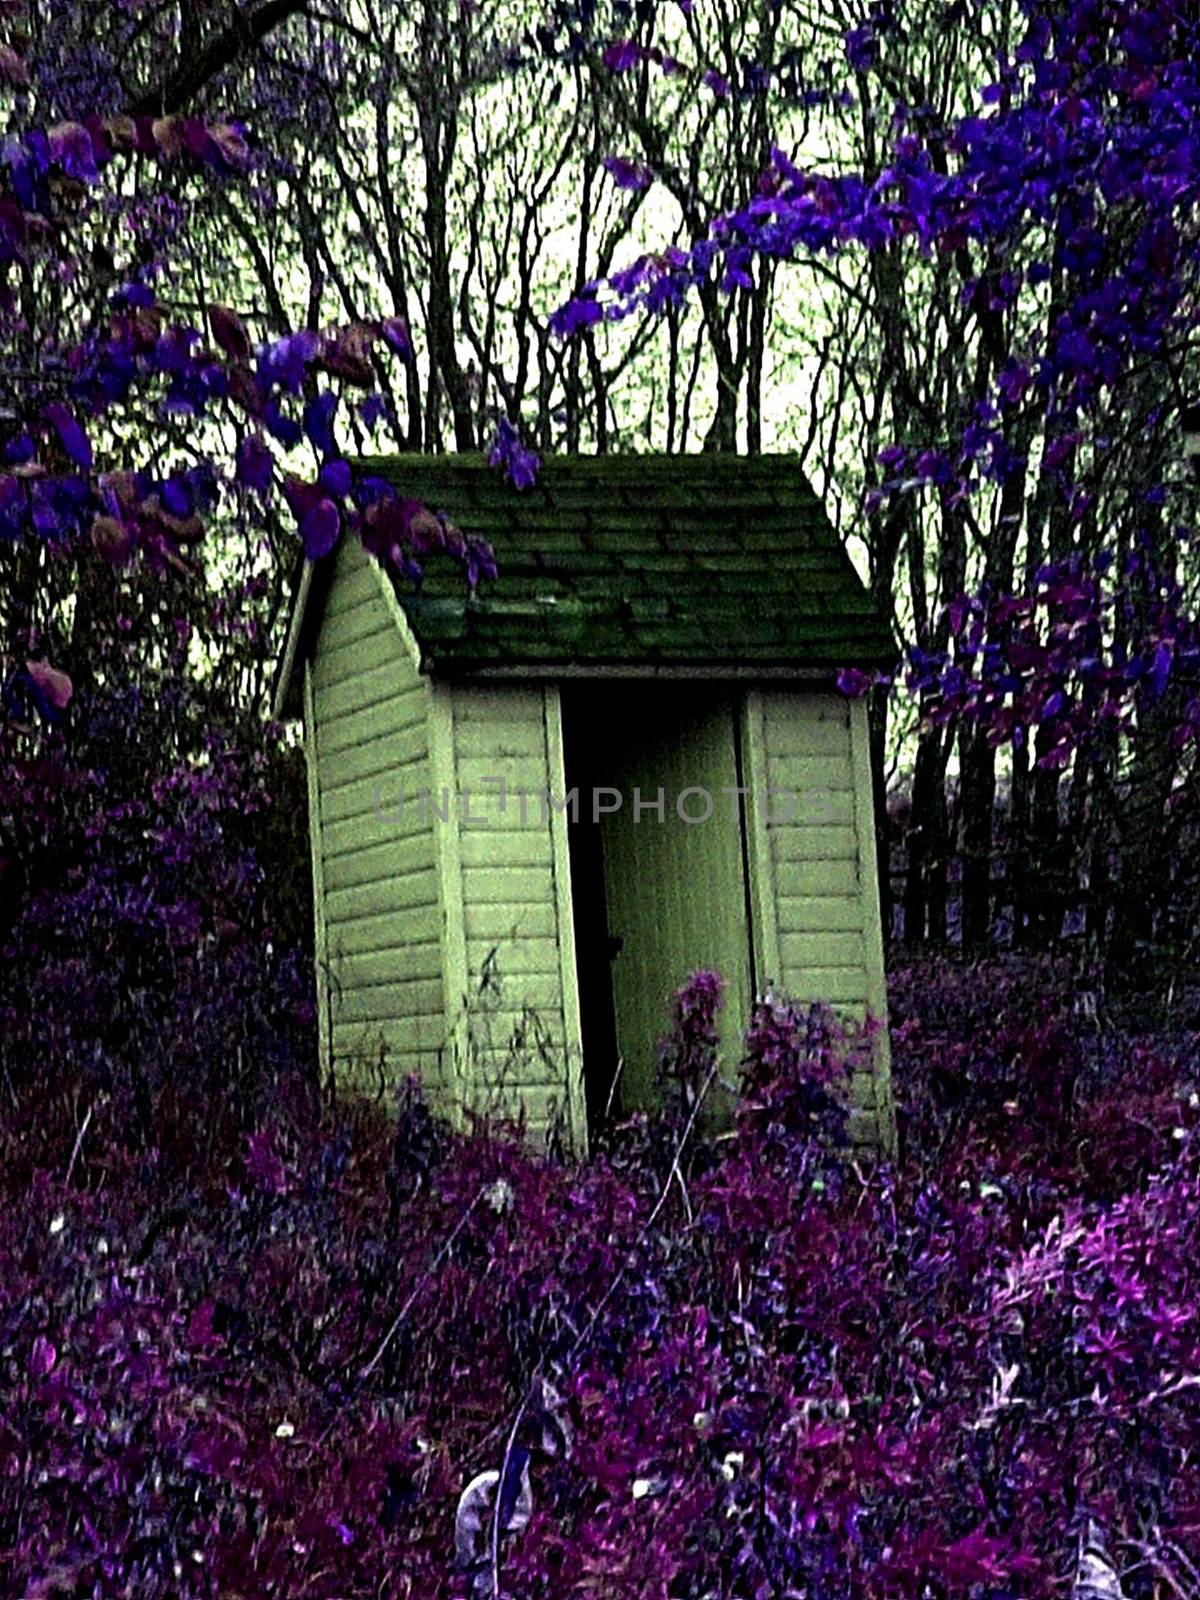 Outhouse surrounded by purple flora.